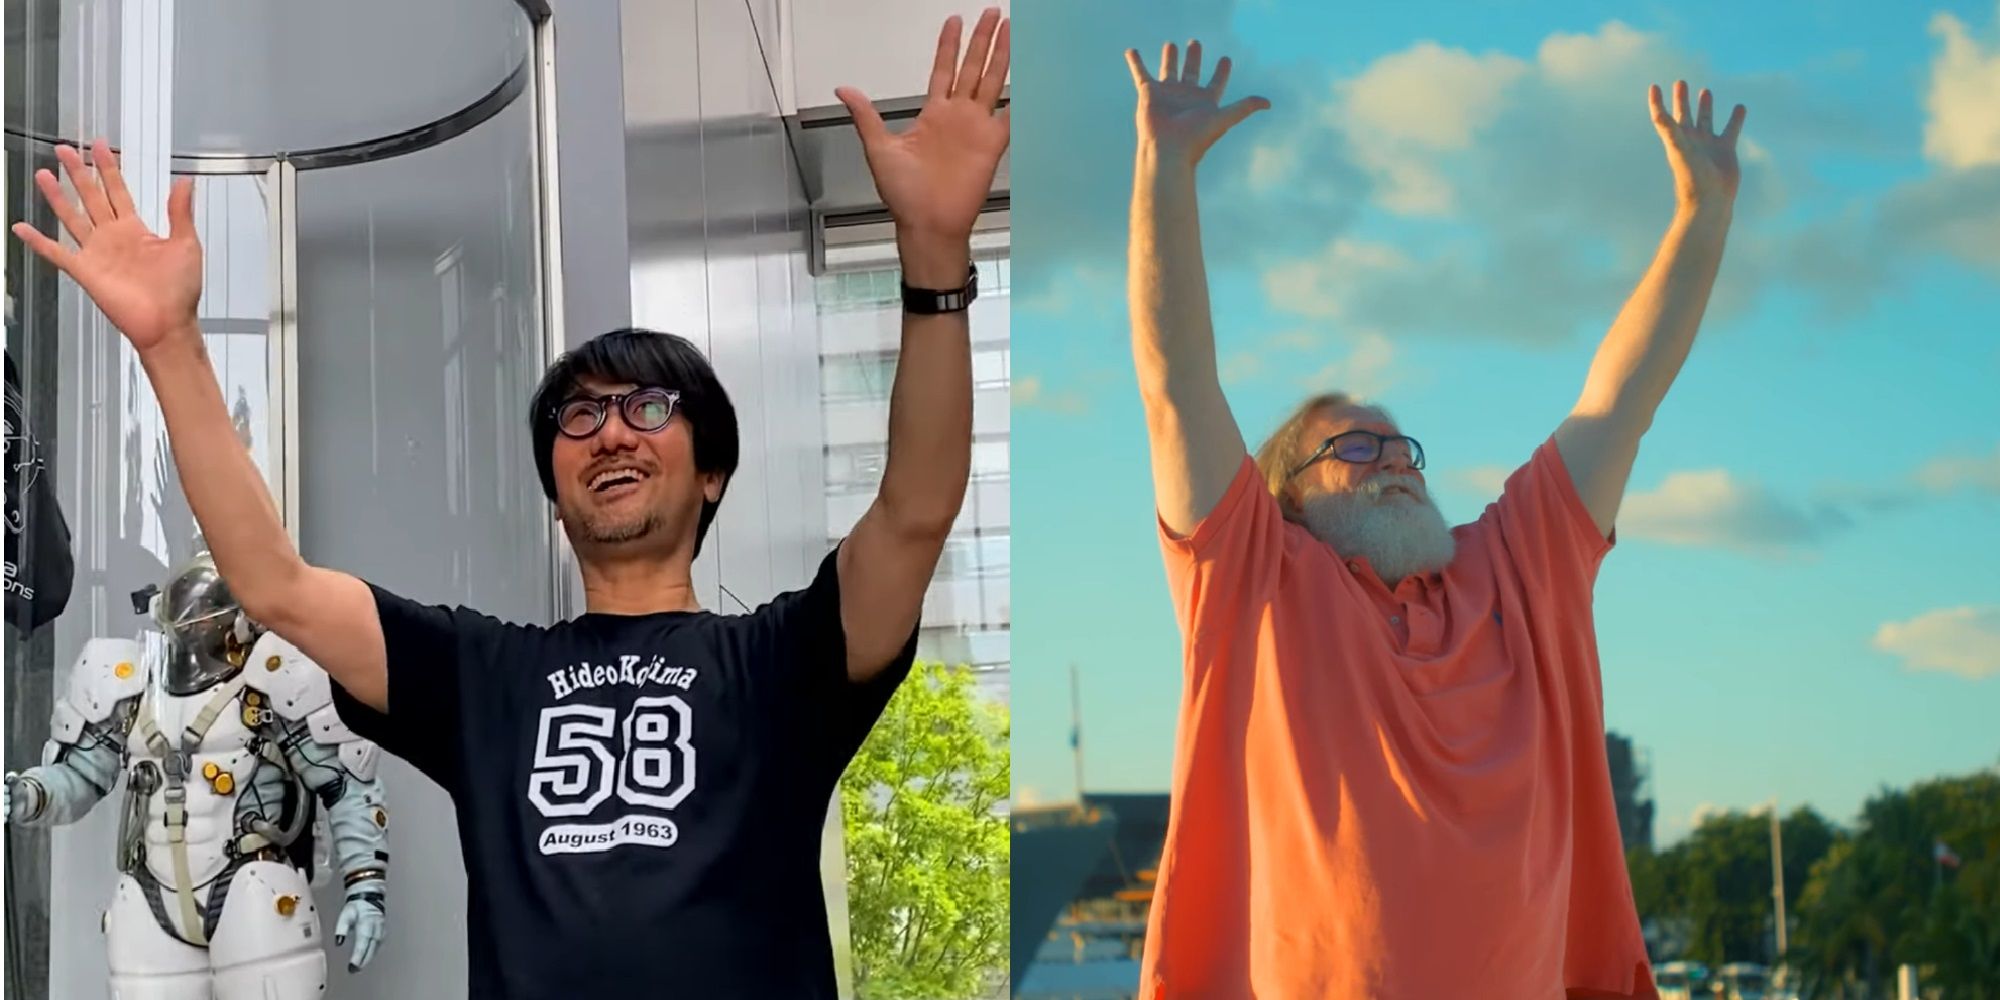 Hideo Kojima goes to Valve and meets with Gabe Newell